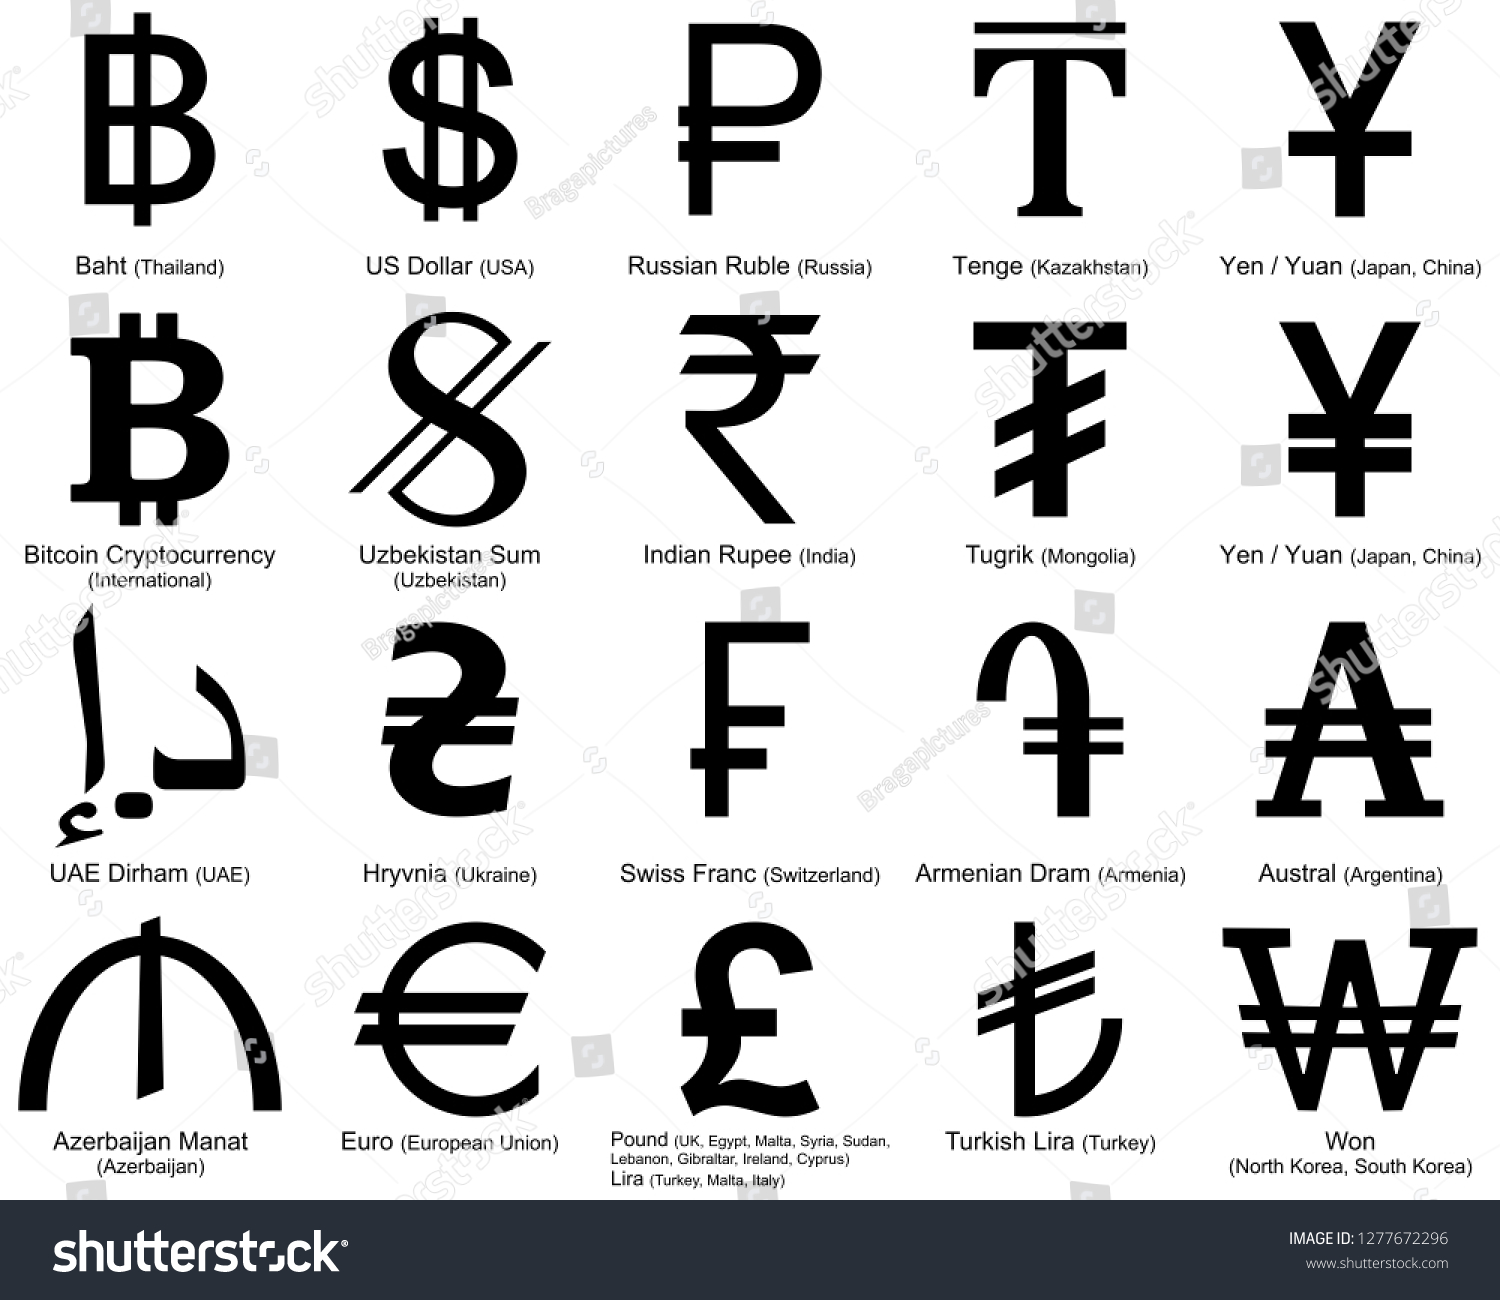 Name a currency